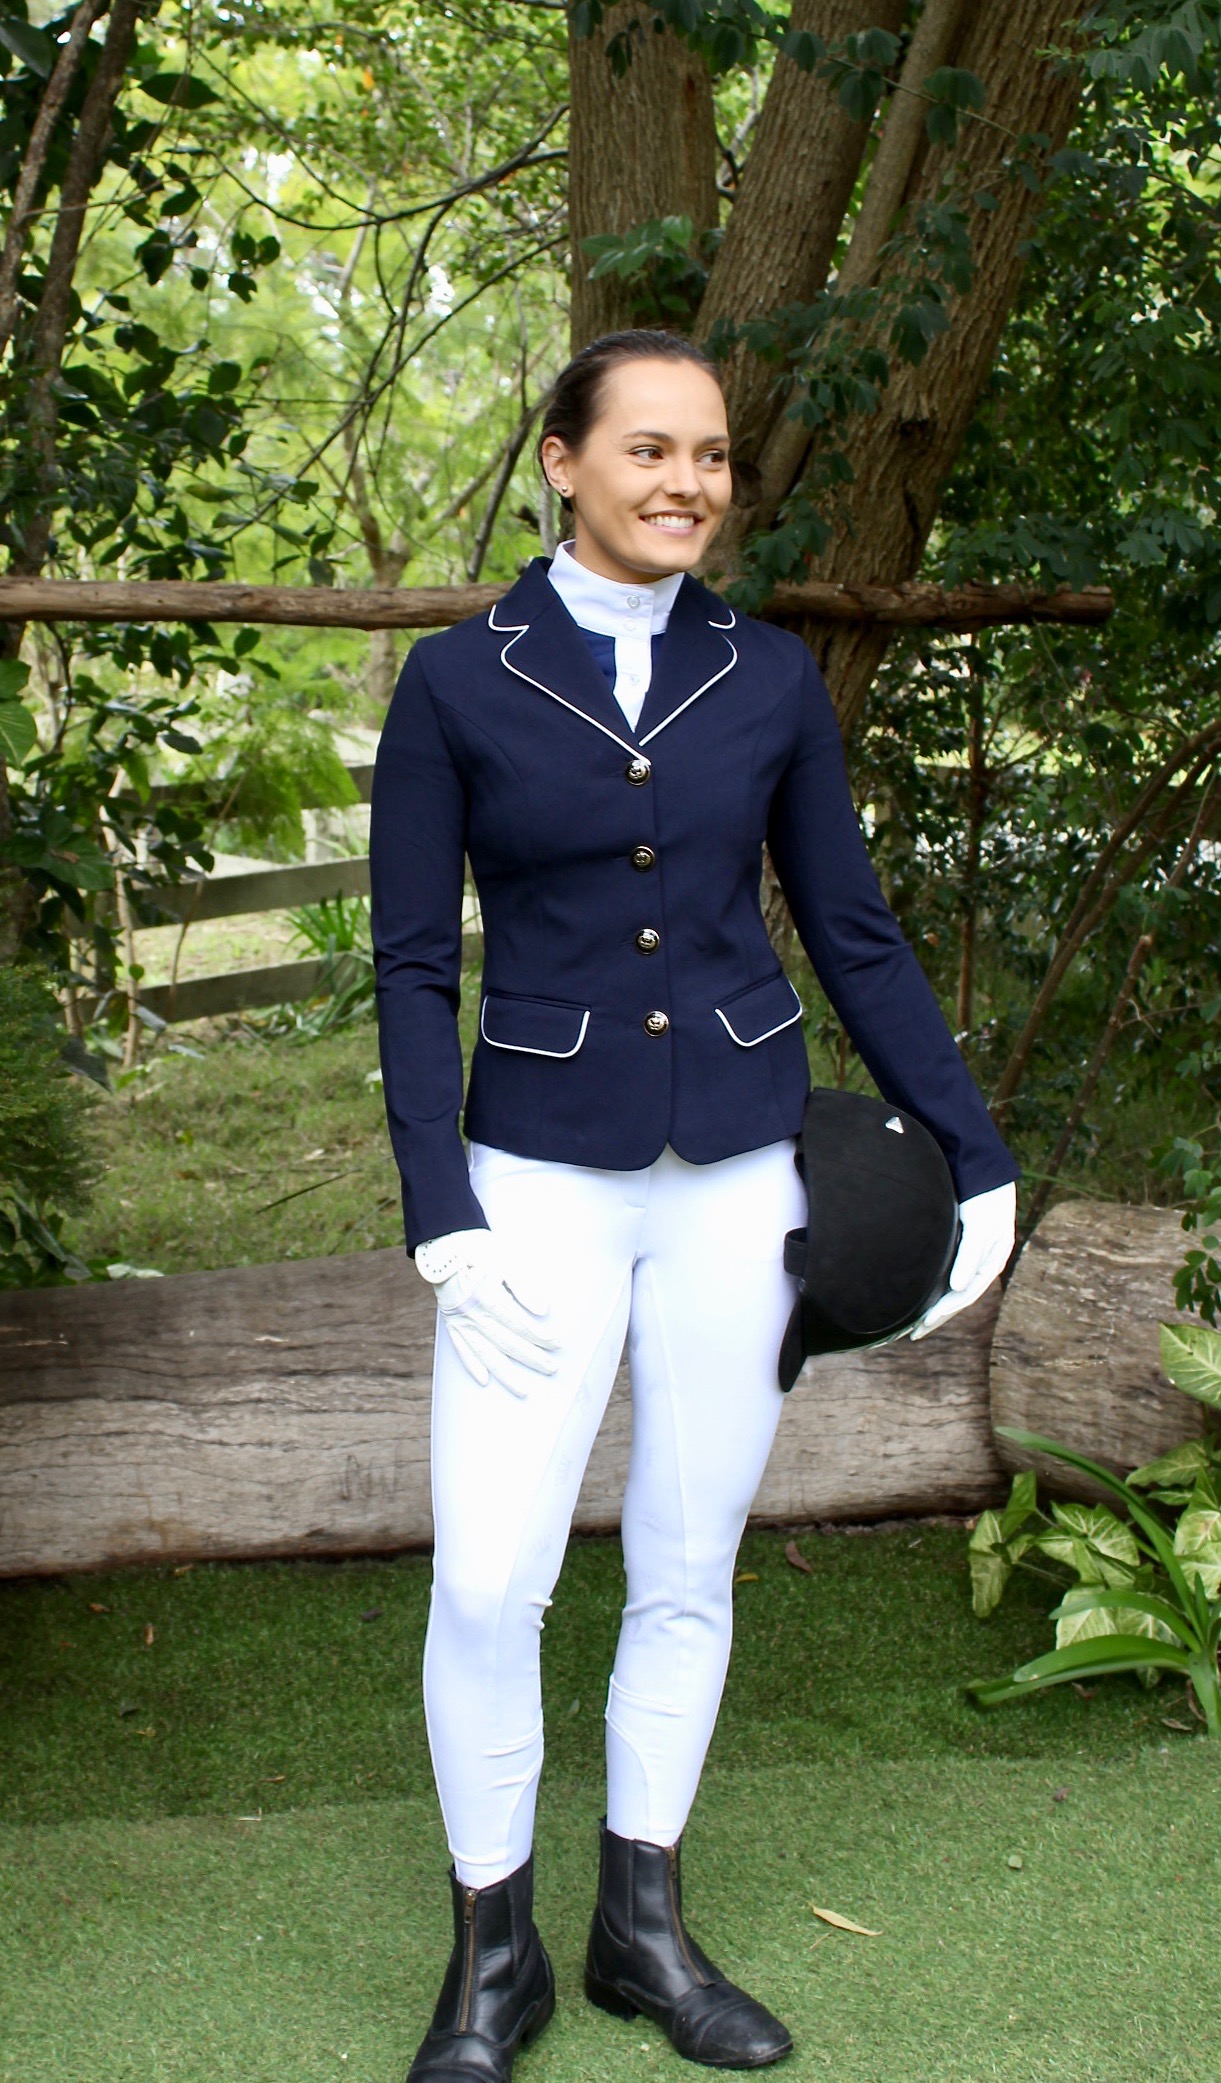 Equestrian, Pro Stretch, Show Jacket-Navy with White Trim - Super Horse ...